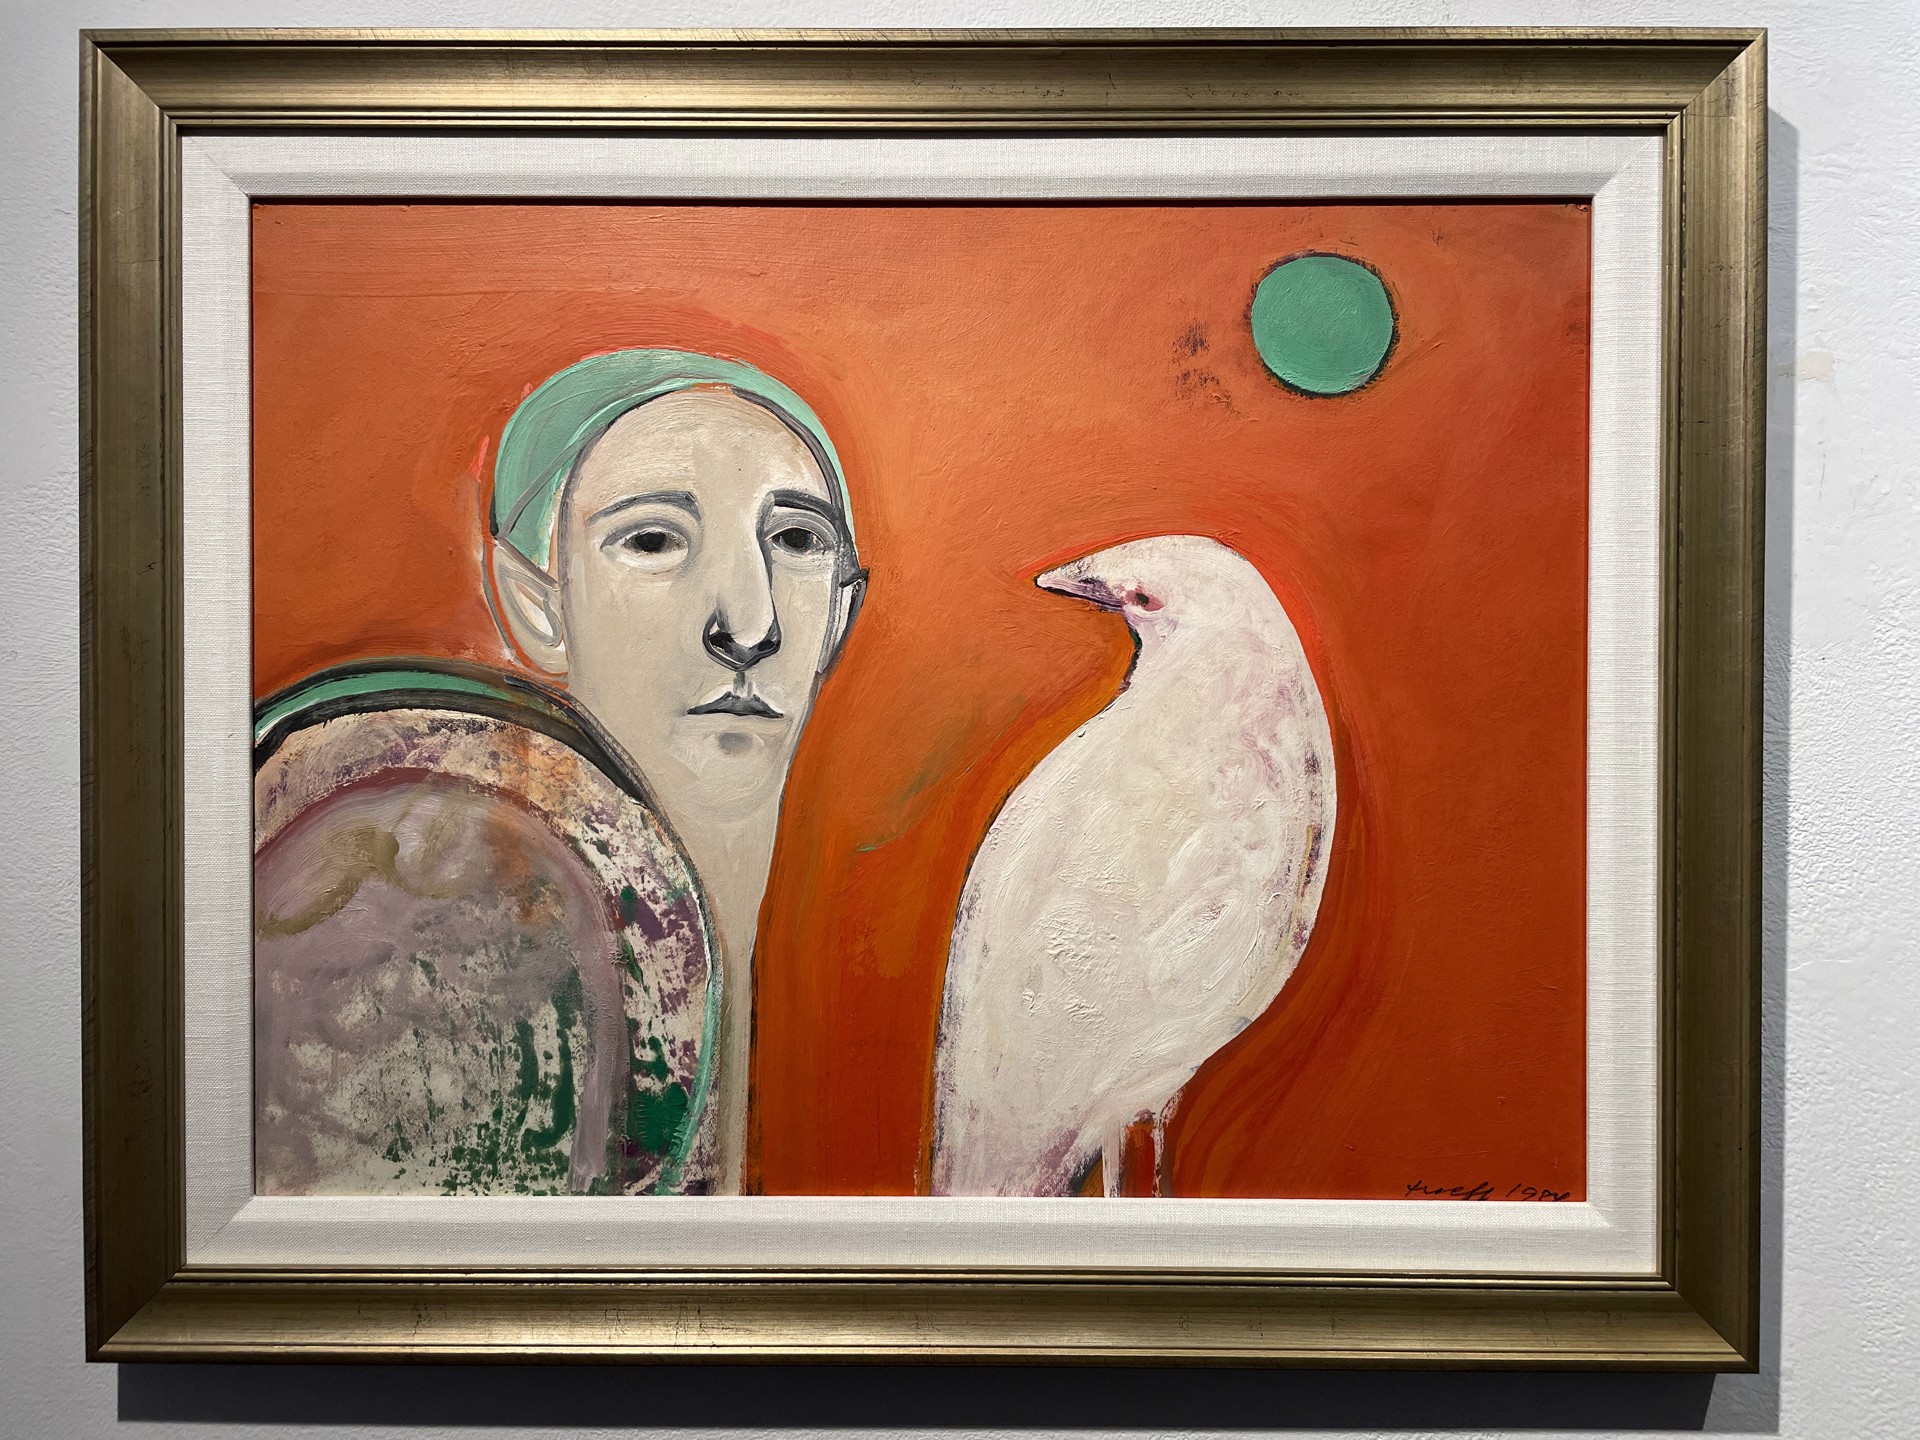 Woman and Bird with Green Moon by Selina Trieff